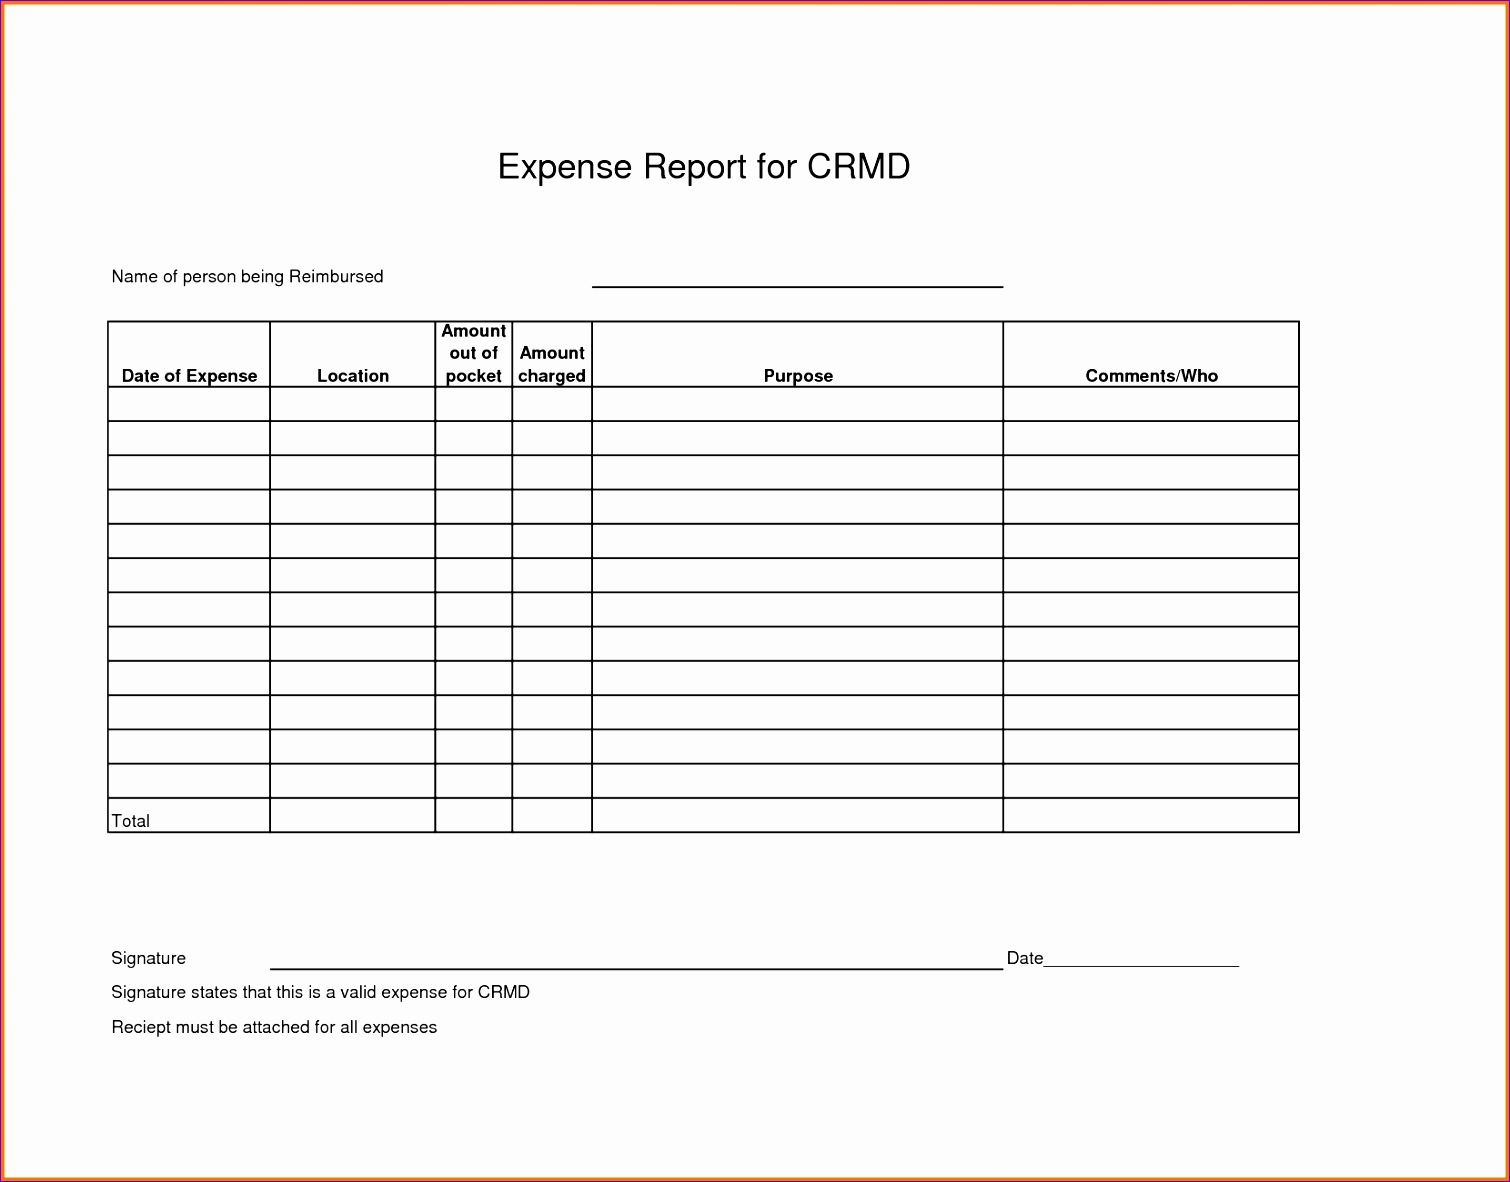 5 expense report excel 15101182